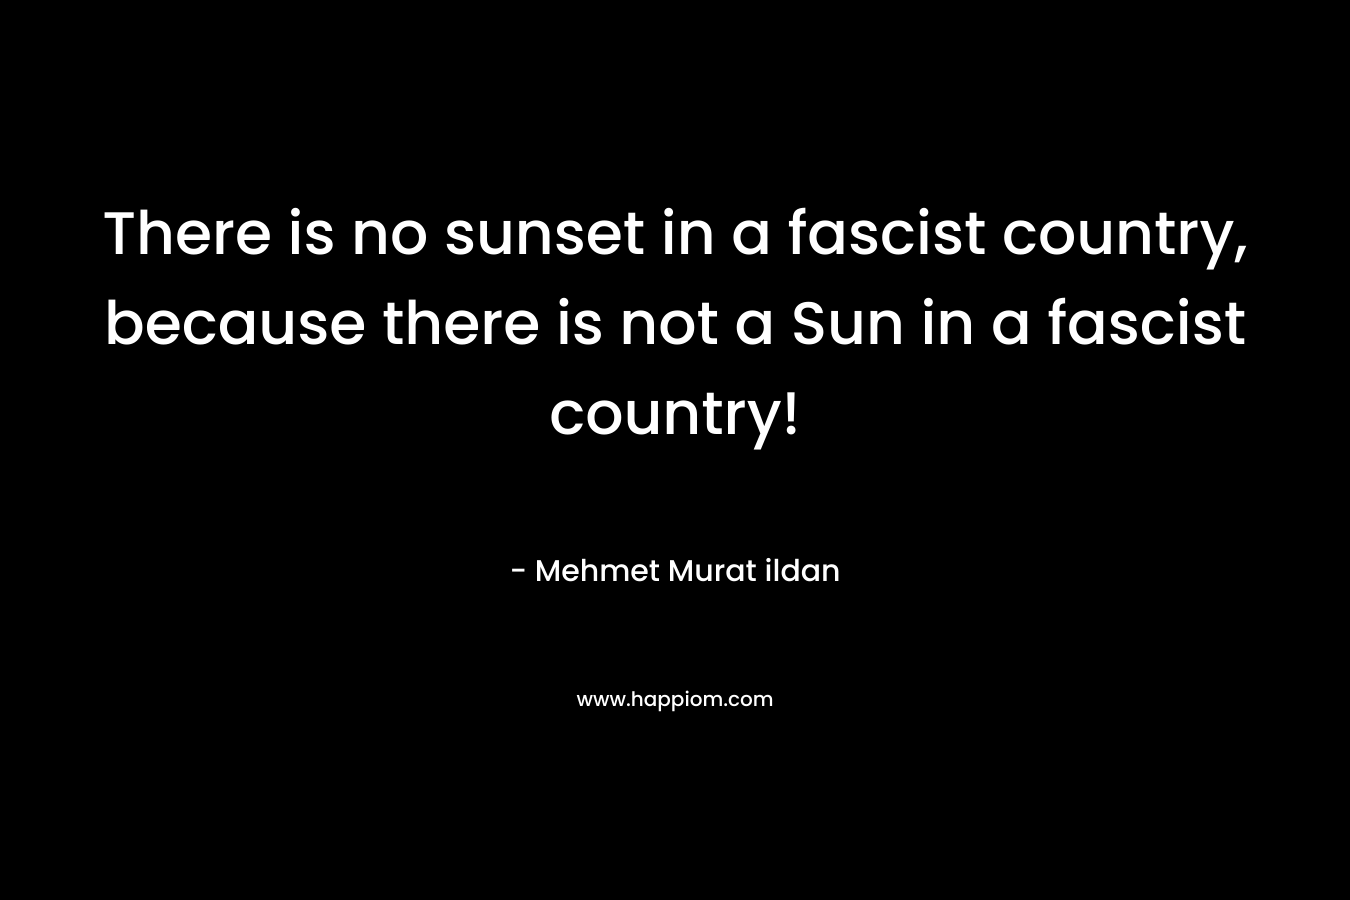 There is no sunset in a fascist country, because there is not a Sun in a fascist country! – Mehmet Murat ildan